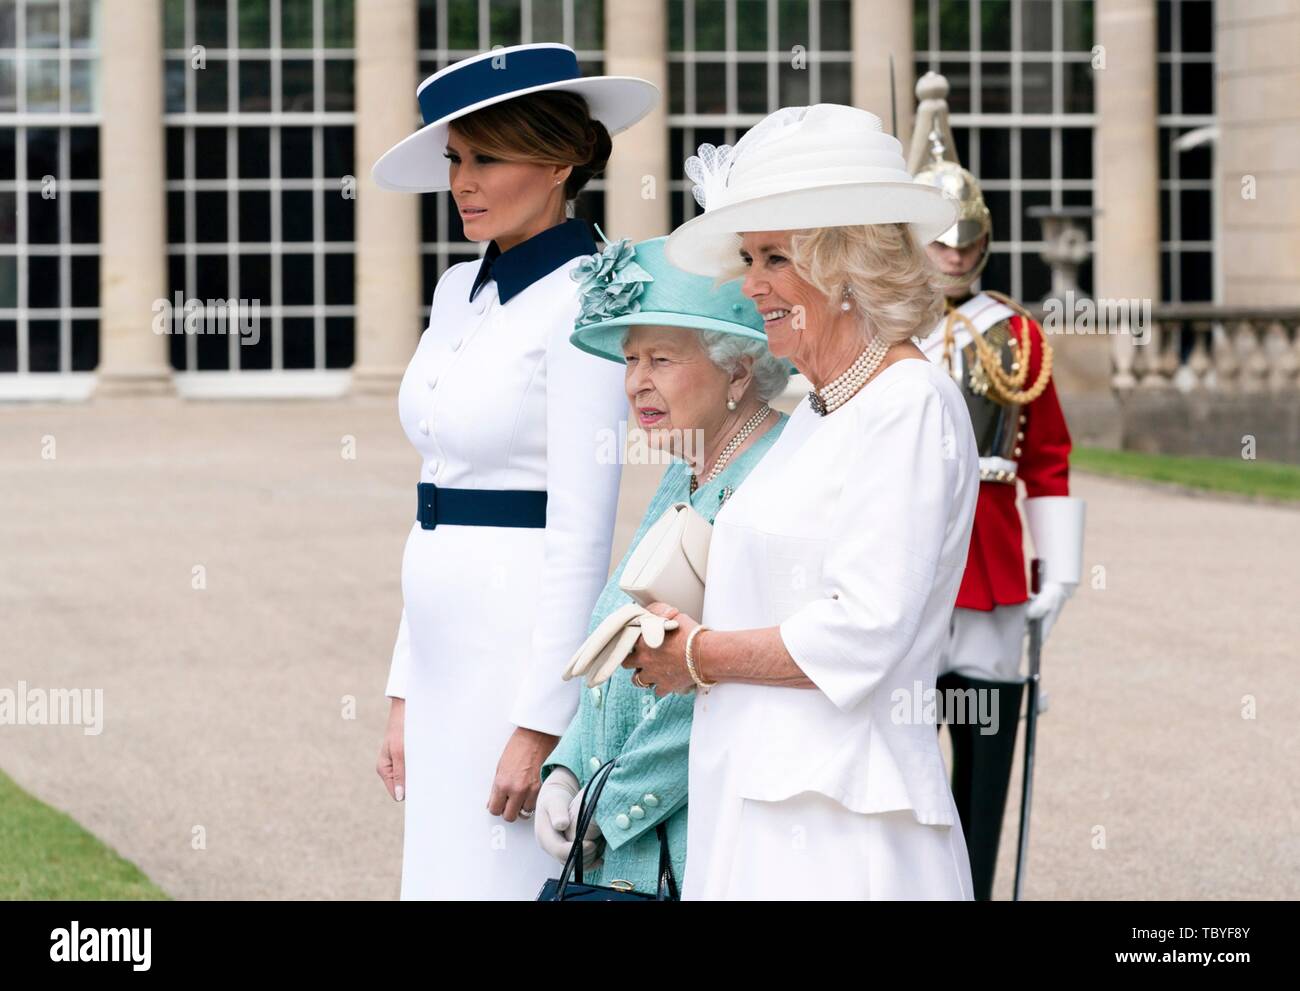 London, UK. 03rd June, 2019. U.S First Lady Melania Trump, stands alongside Queen Elizabeth II and the Duchess of Cornwall, right, during the official welcoming ceremony at Buckingham Palace June 3, 2019 in London, England. Credit: Planetpix/Alamy Live News Stock Photo